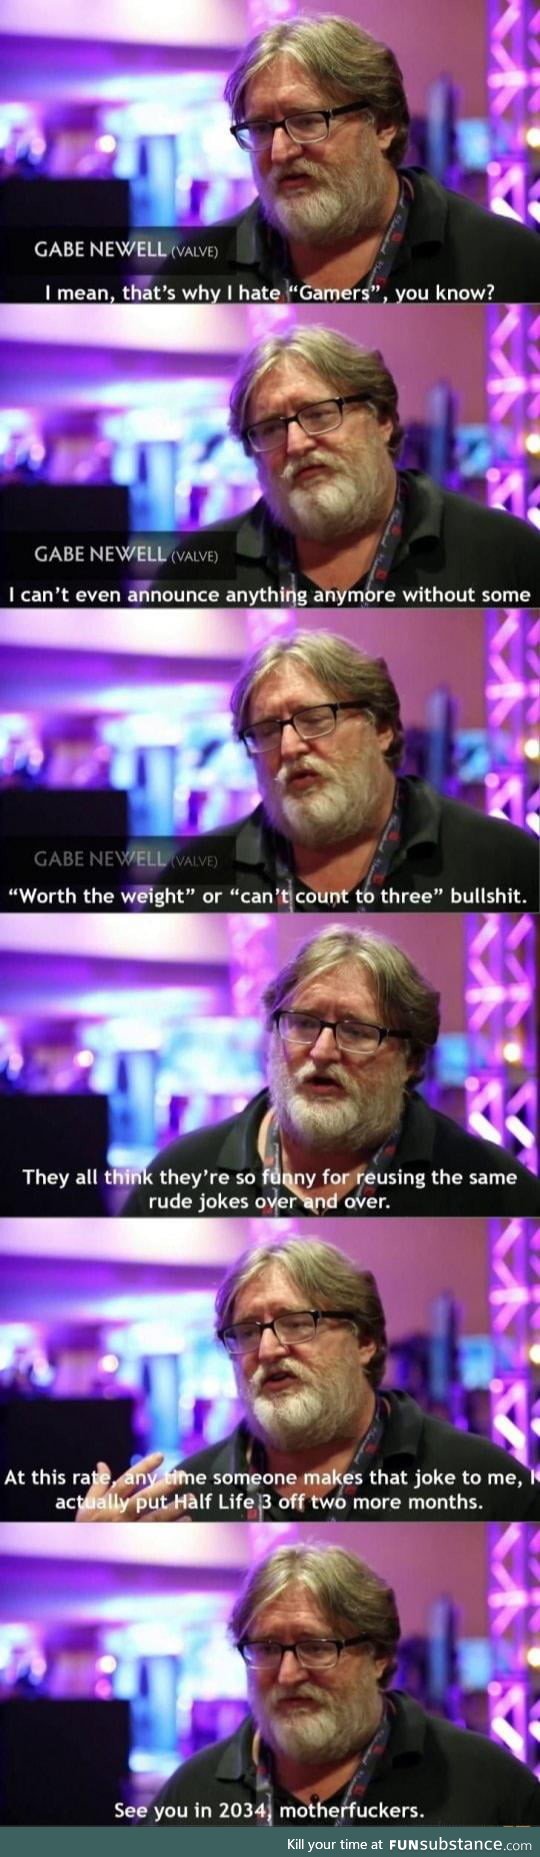 E gaben, can you count to tree?